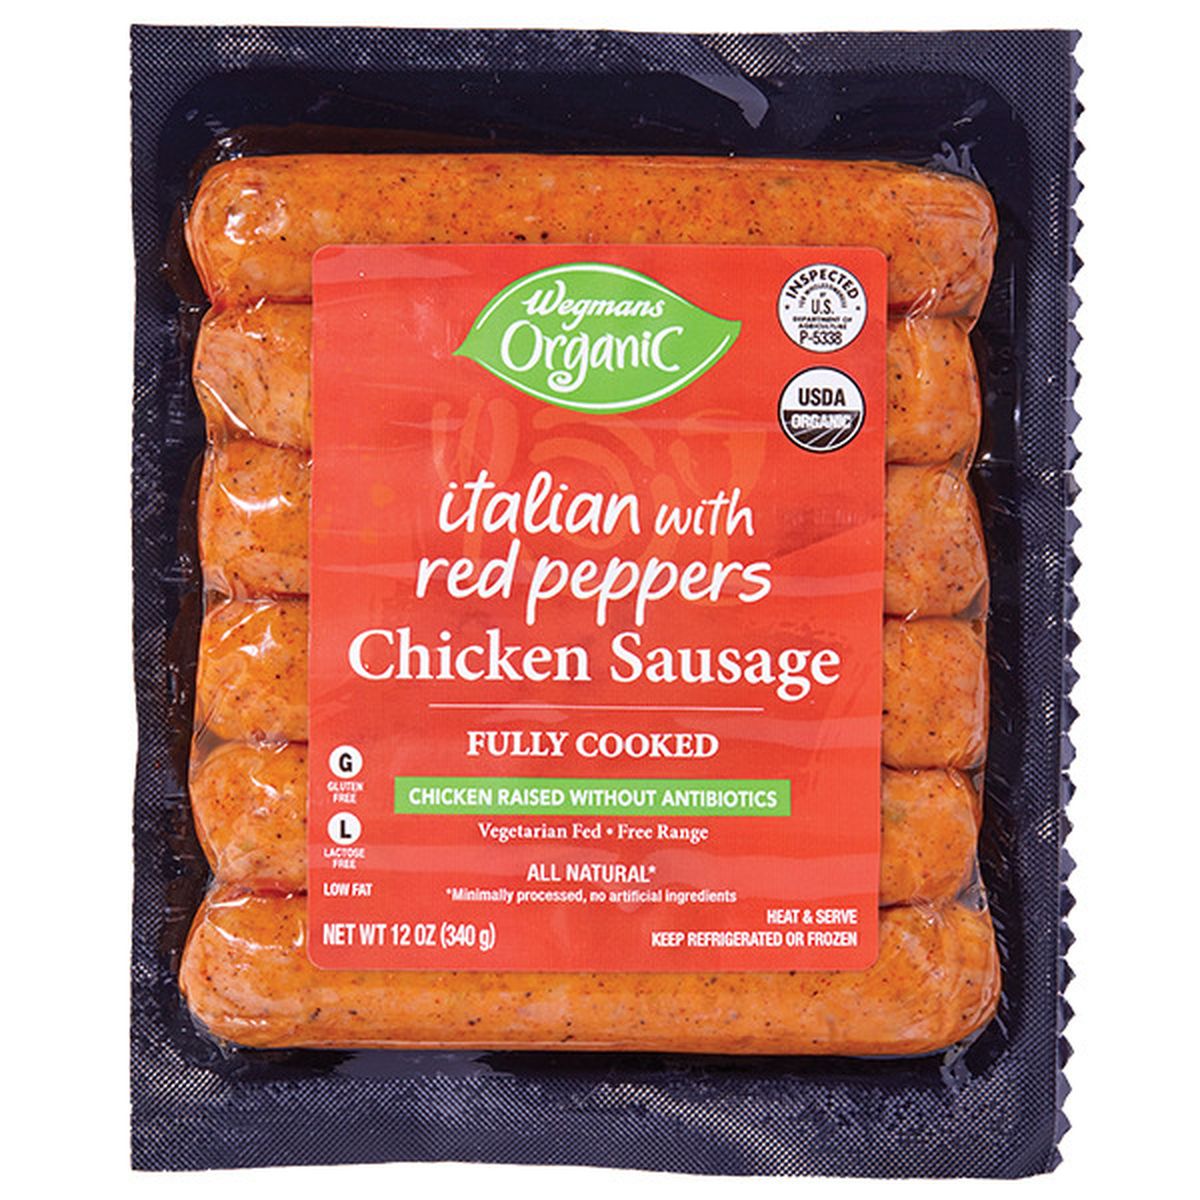 Calories in Wegmans Organic Chicken Sausage, Italian with Red Peppers